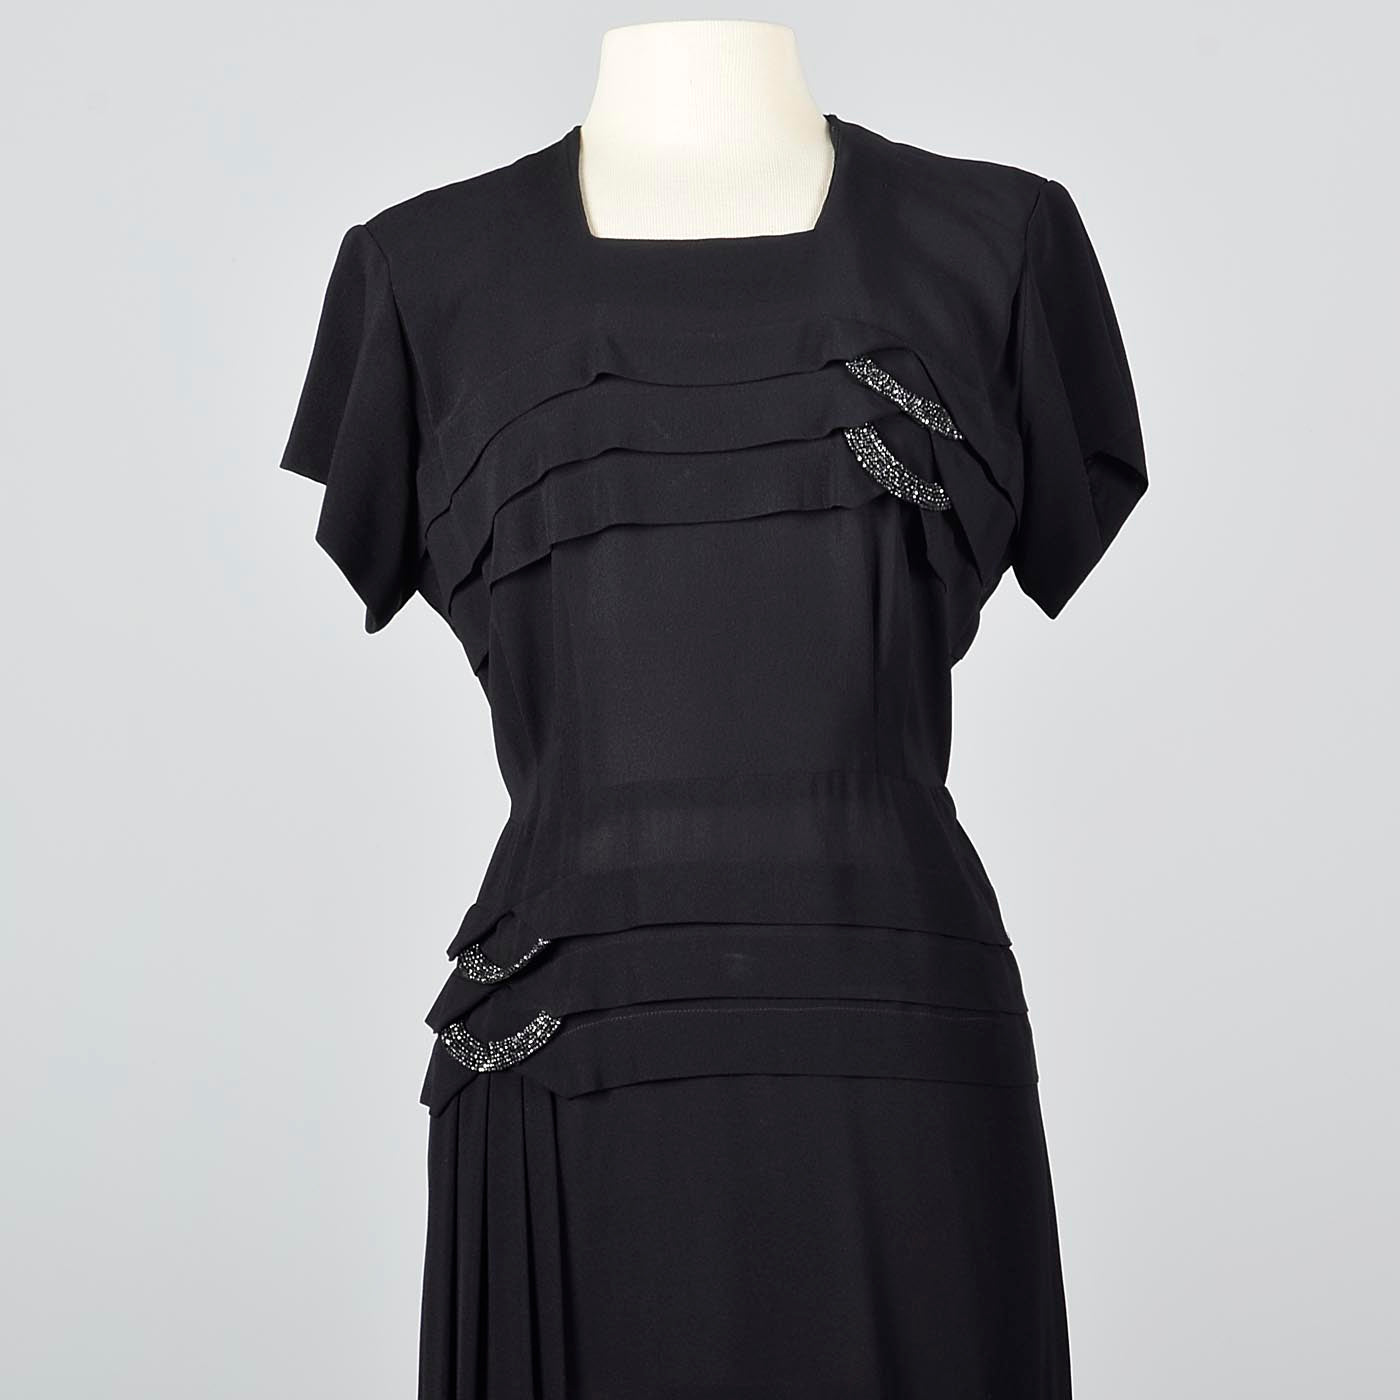 1950s Black Dress with Beaded Loops and Sash